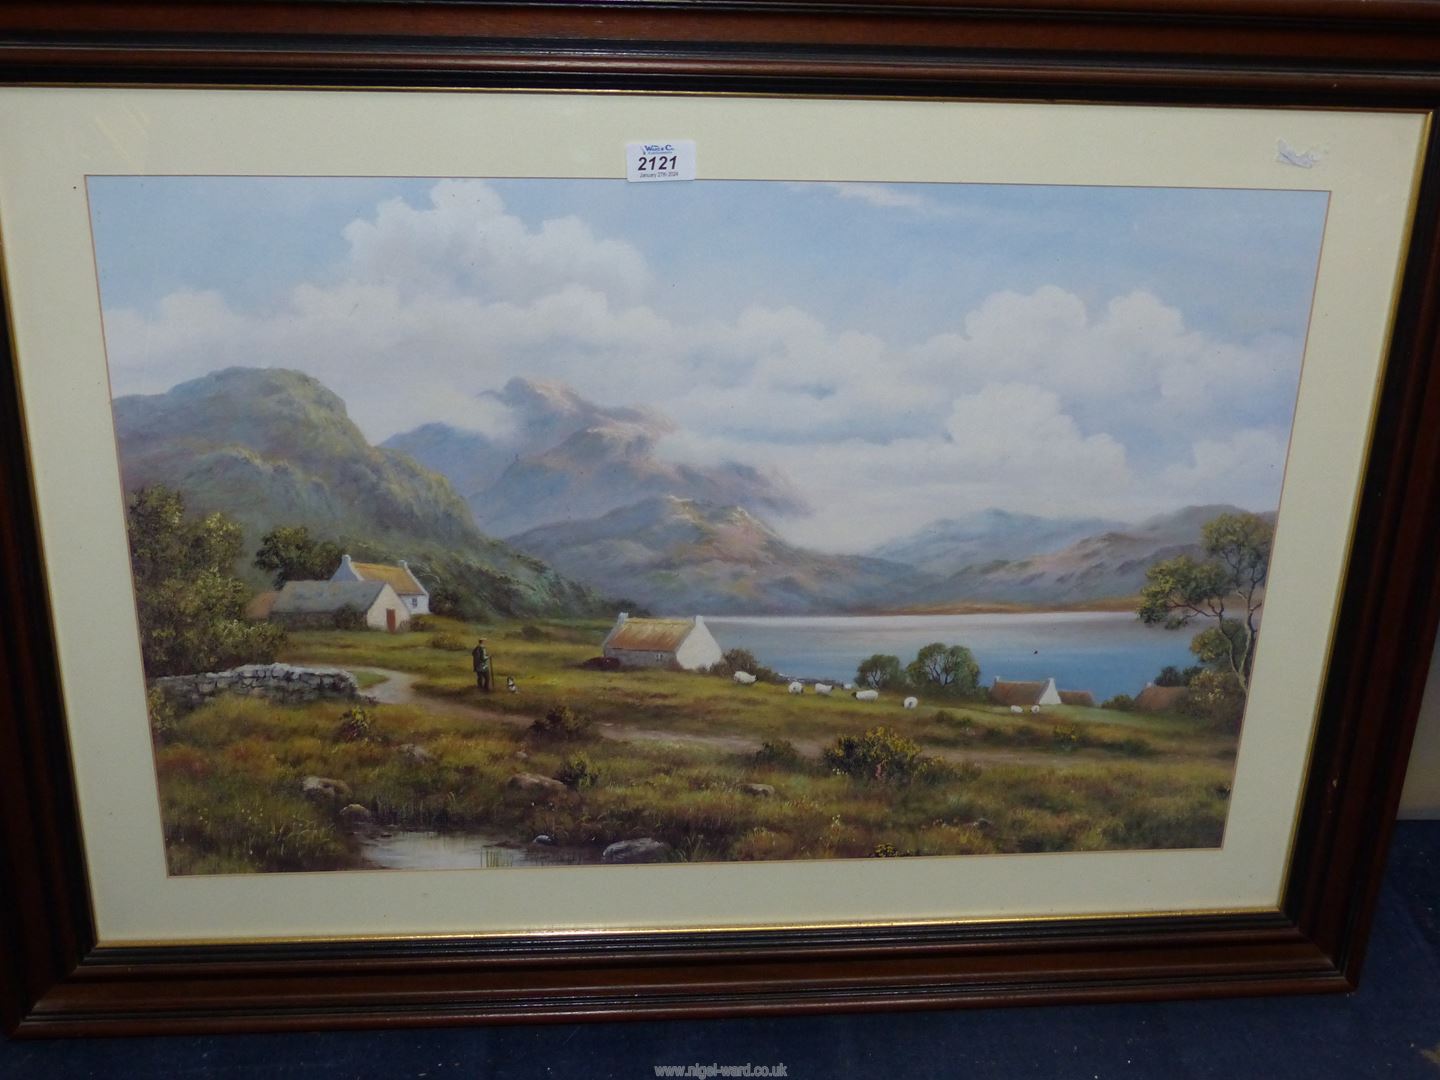 A large framed and mounted Print depicting a shepherd and his dog checking his sheep overlooking - Image 2 of 2